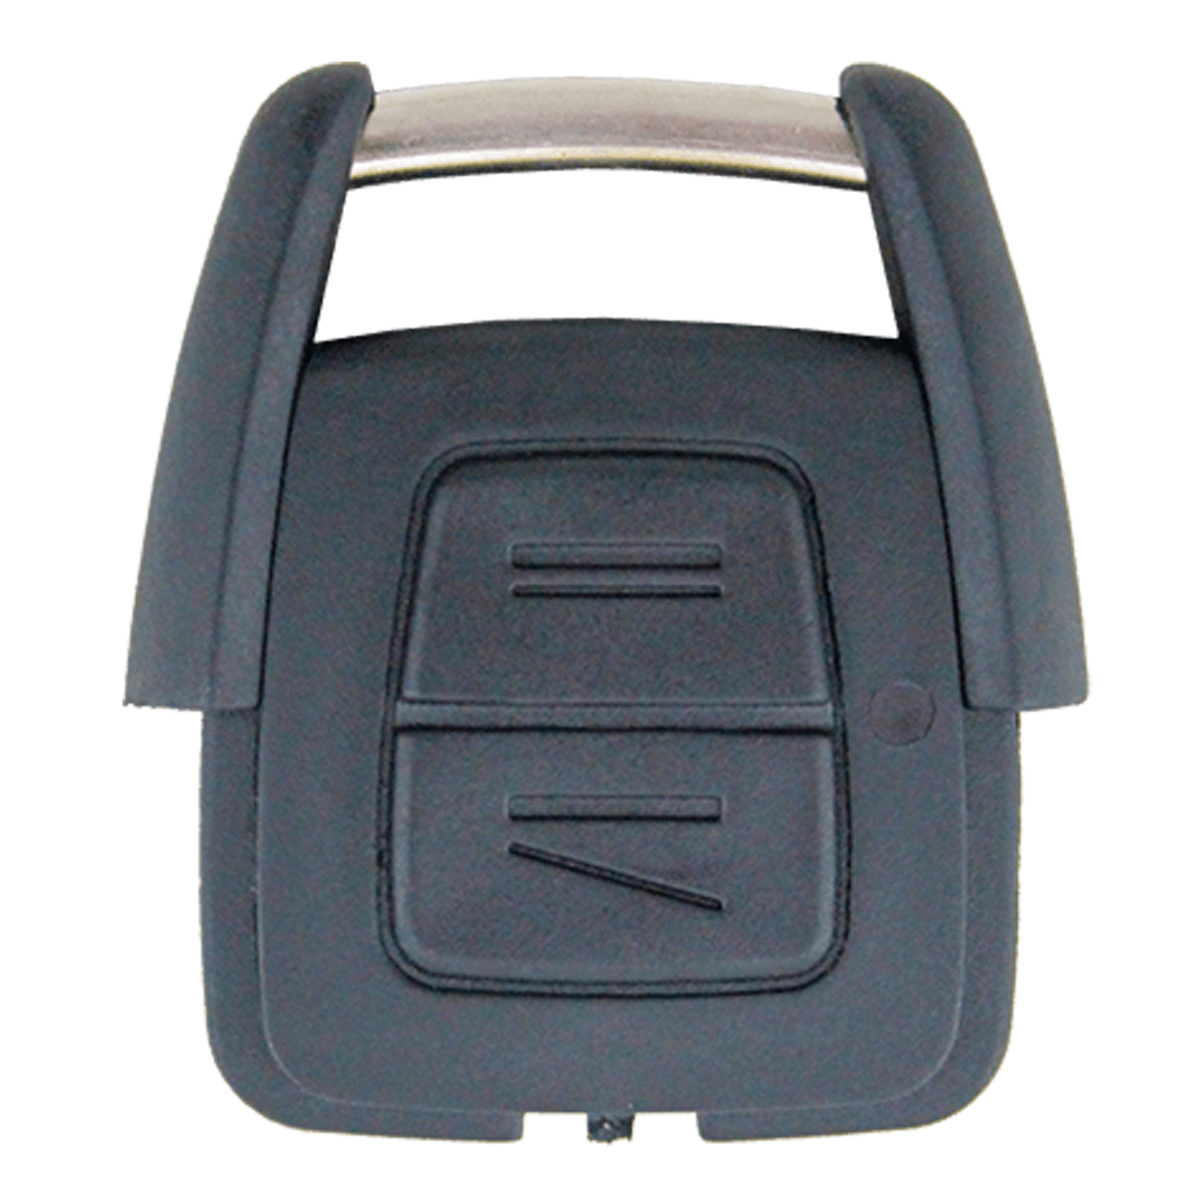 Genuine Holden Astra 2 button remote to suit Convertible 433 MHz